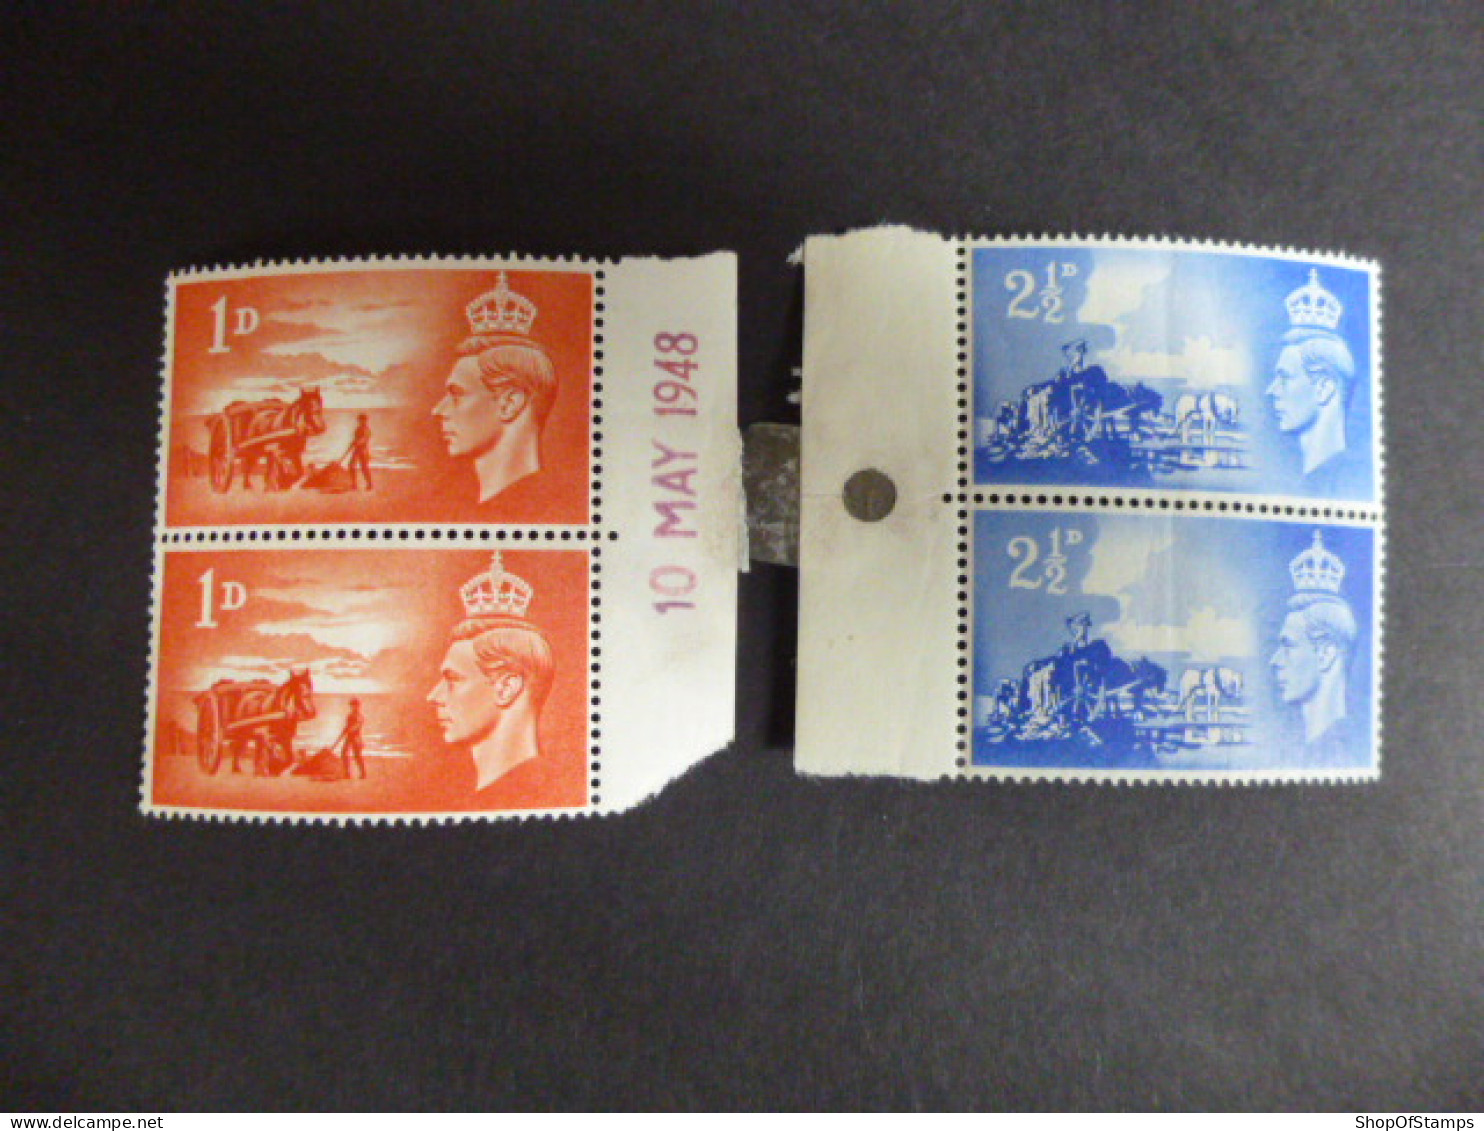 CHANNEL ISLANDS 01-02 MINT PAIR WITH ISSUE DATE STAMP - Unclassified